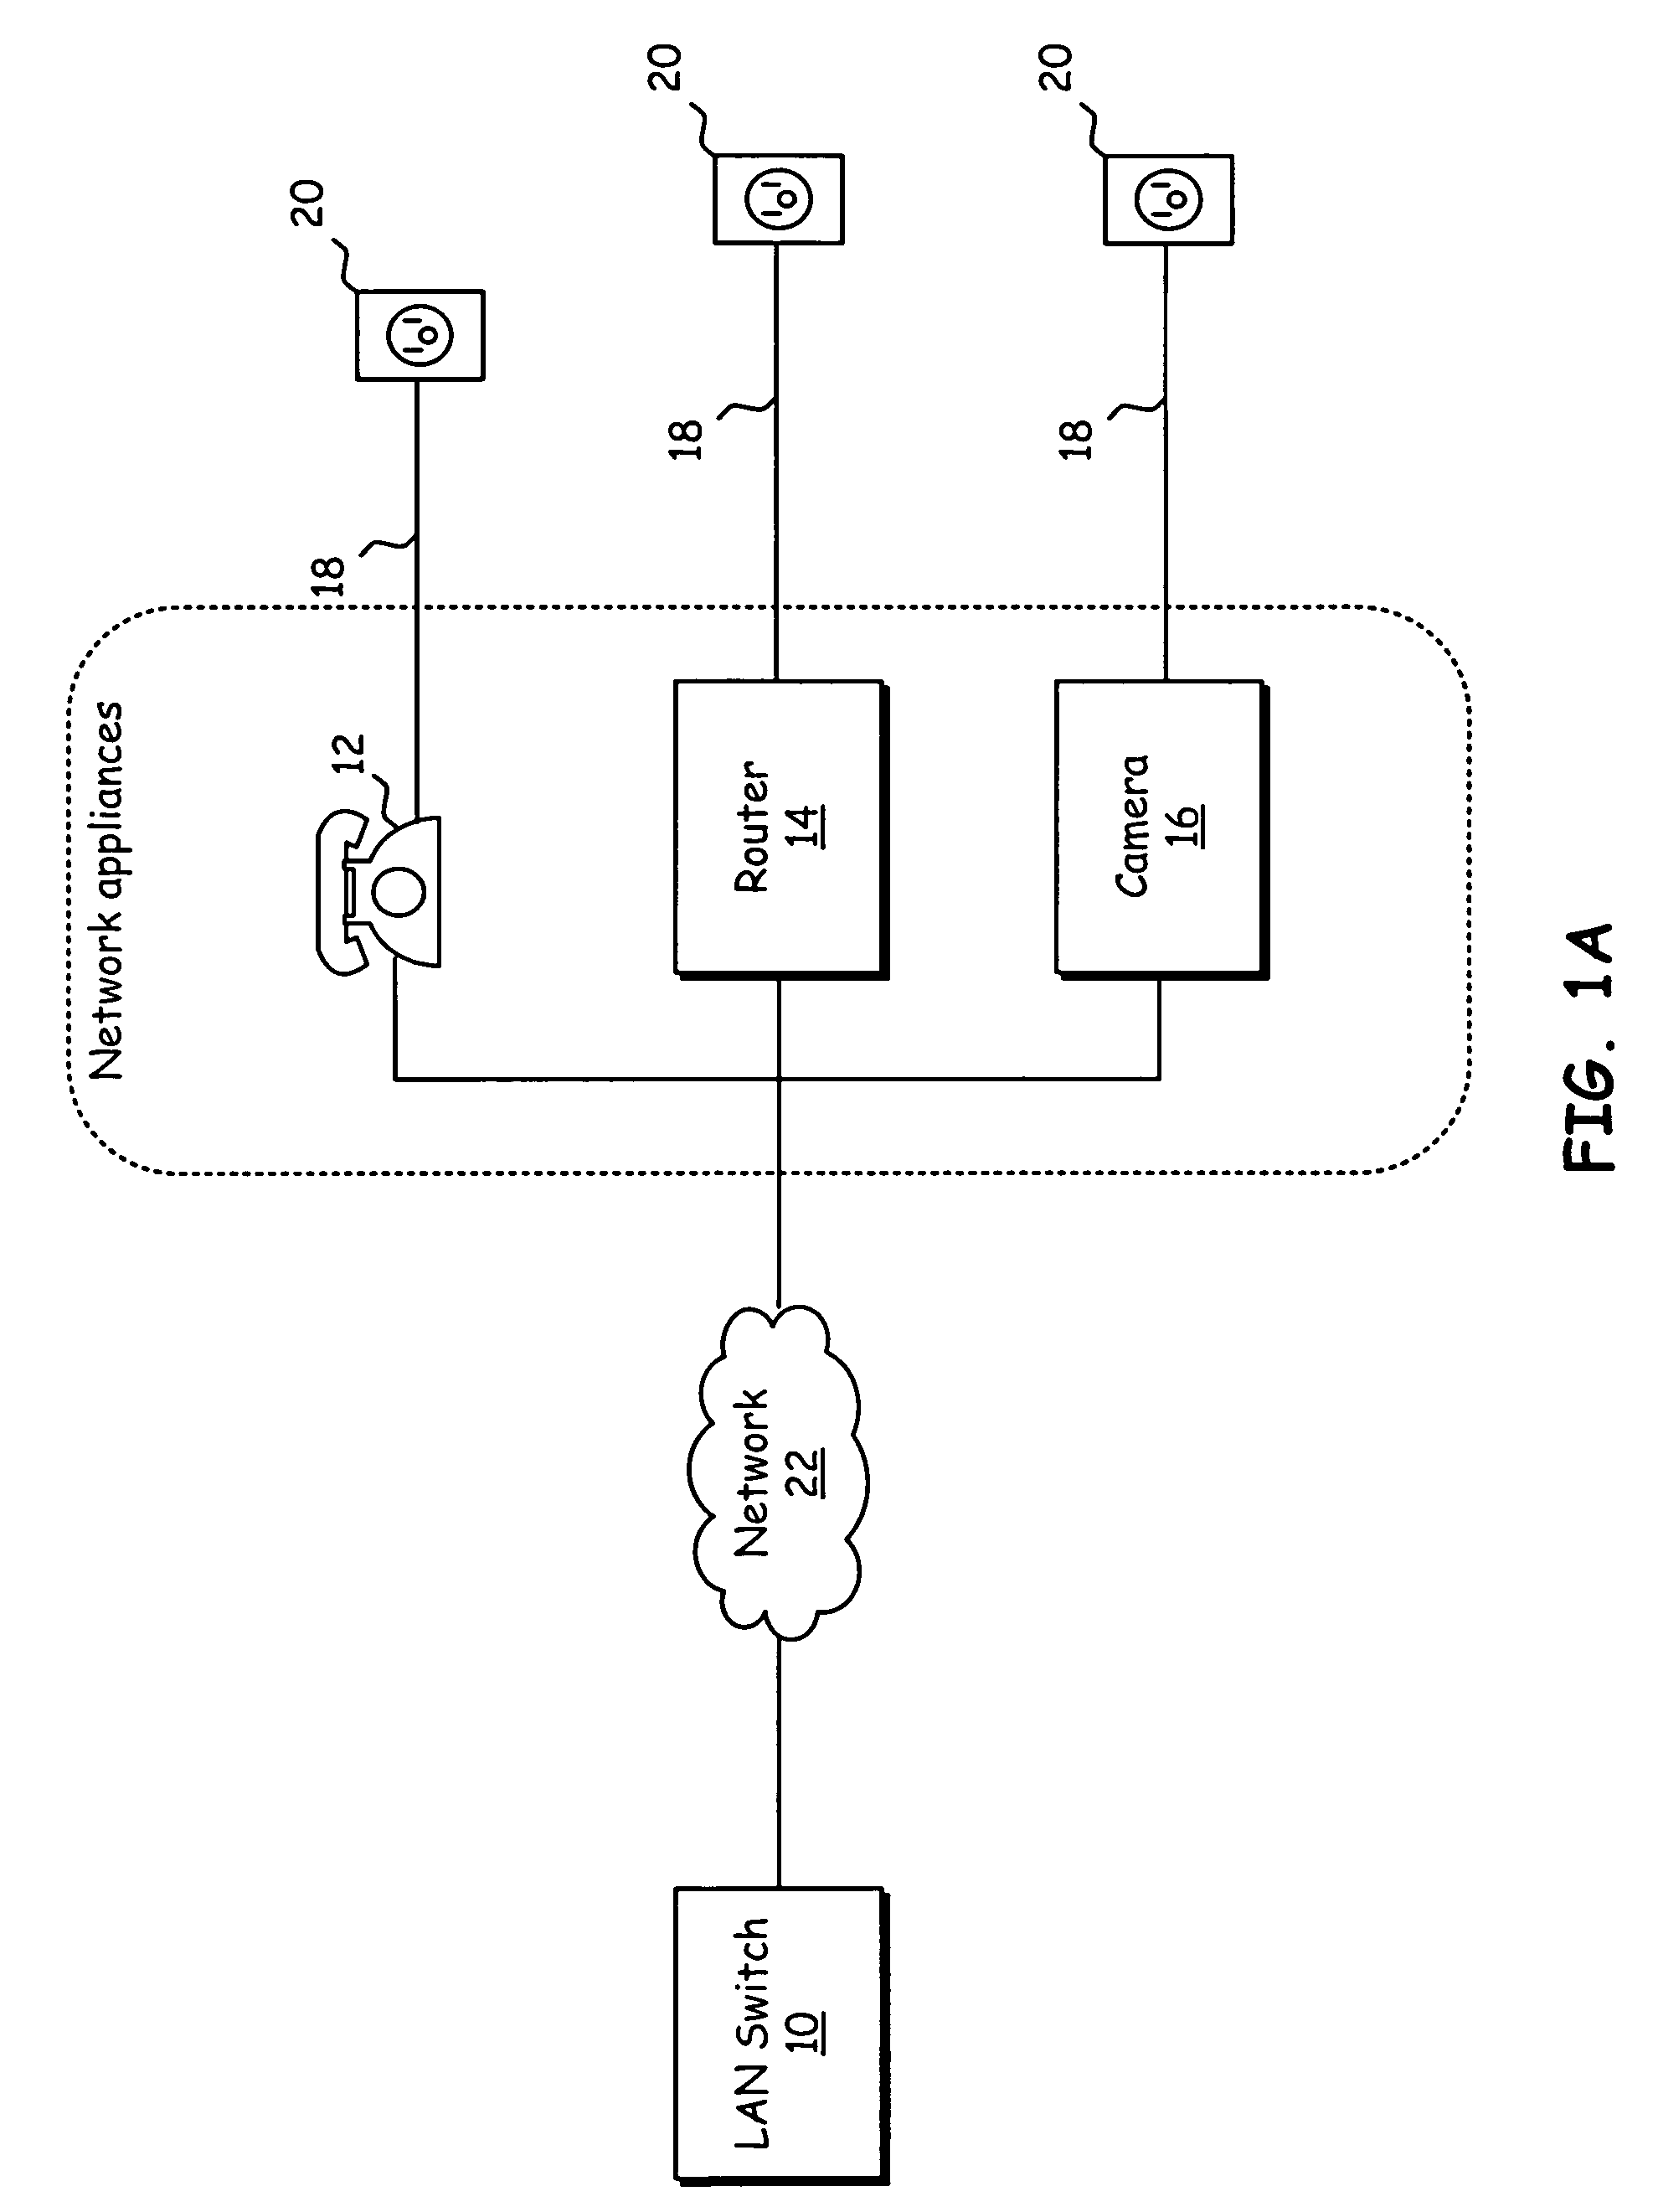 Systems and methods operable to allow loop powering of networked devices